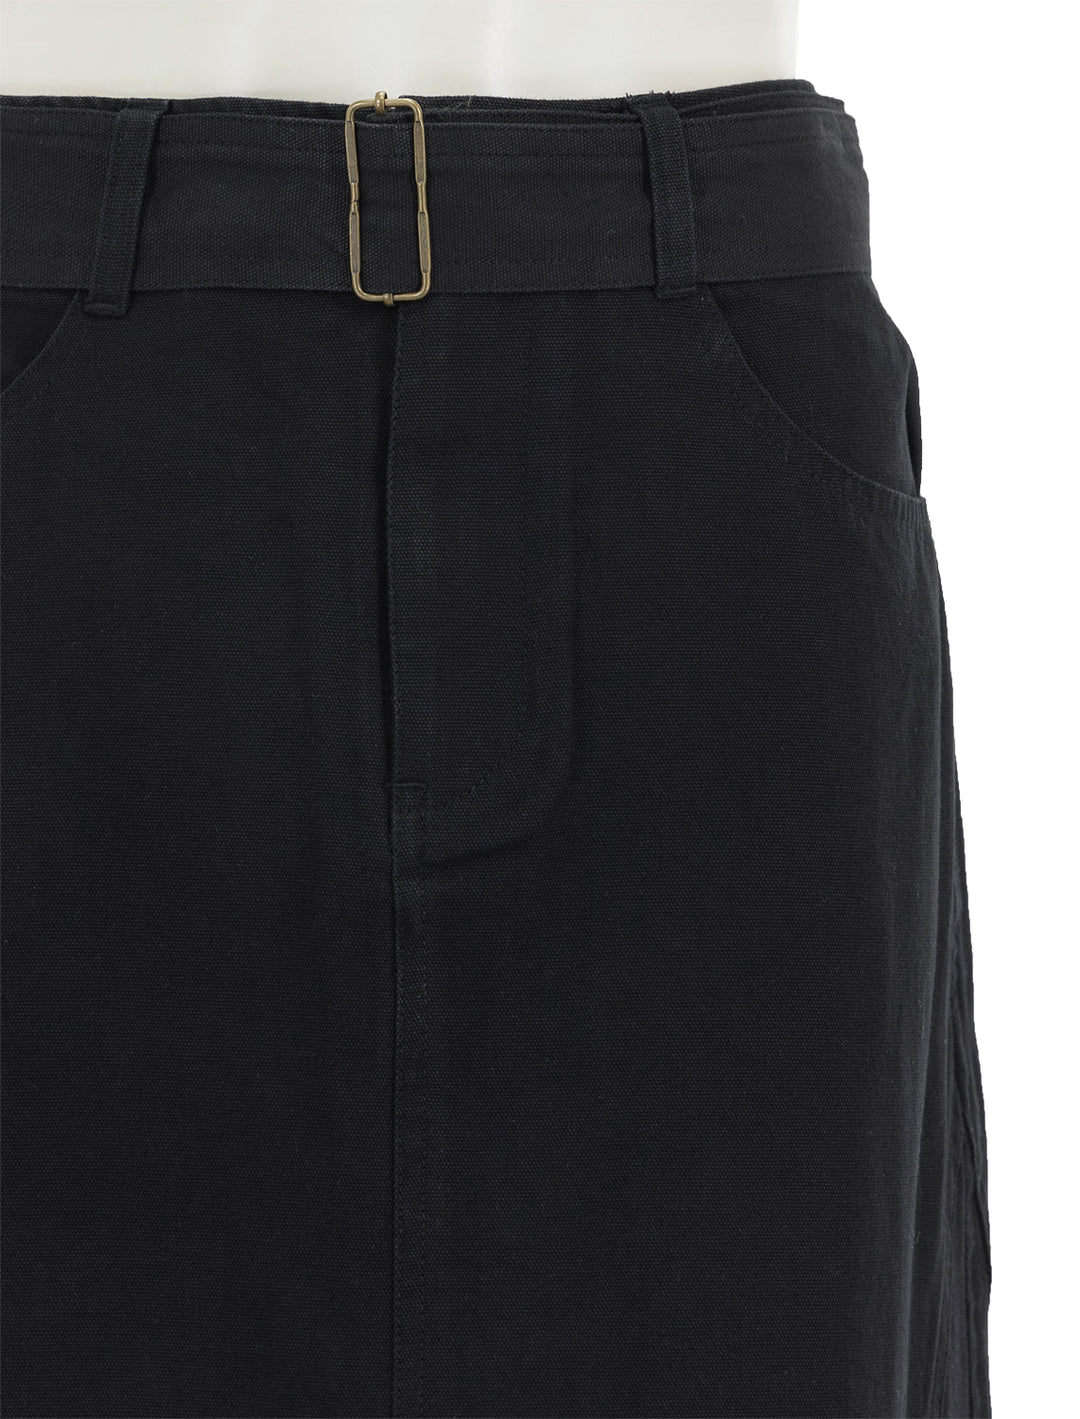 Close-up view of Lilla P.'s jean skirt in black.